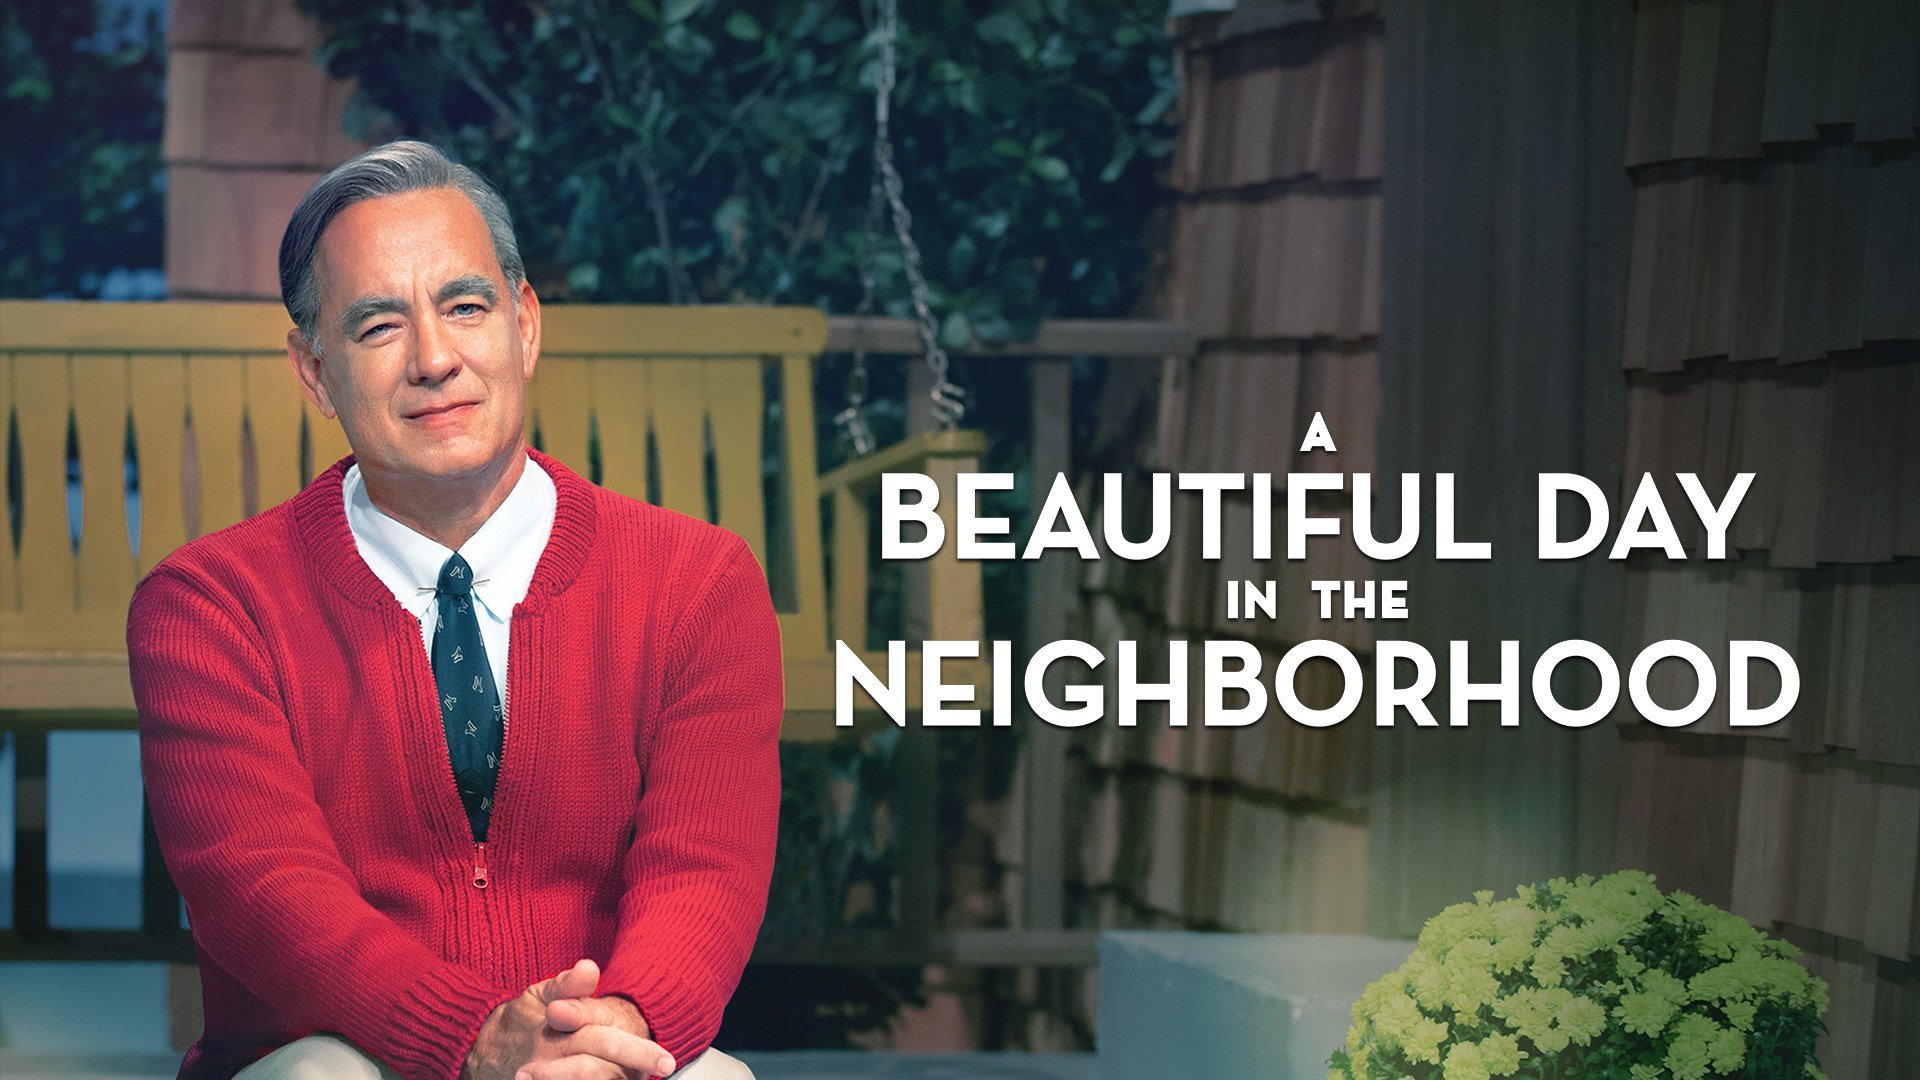 A Beautiful Day In The Neighborhood - stream på Amazon Prime Video